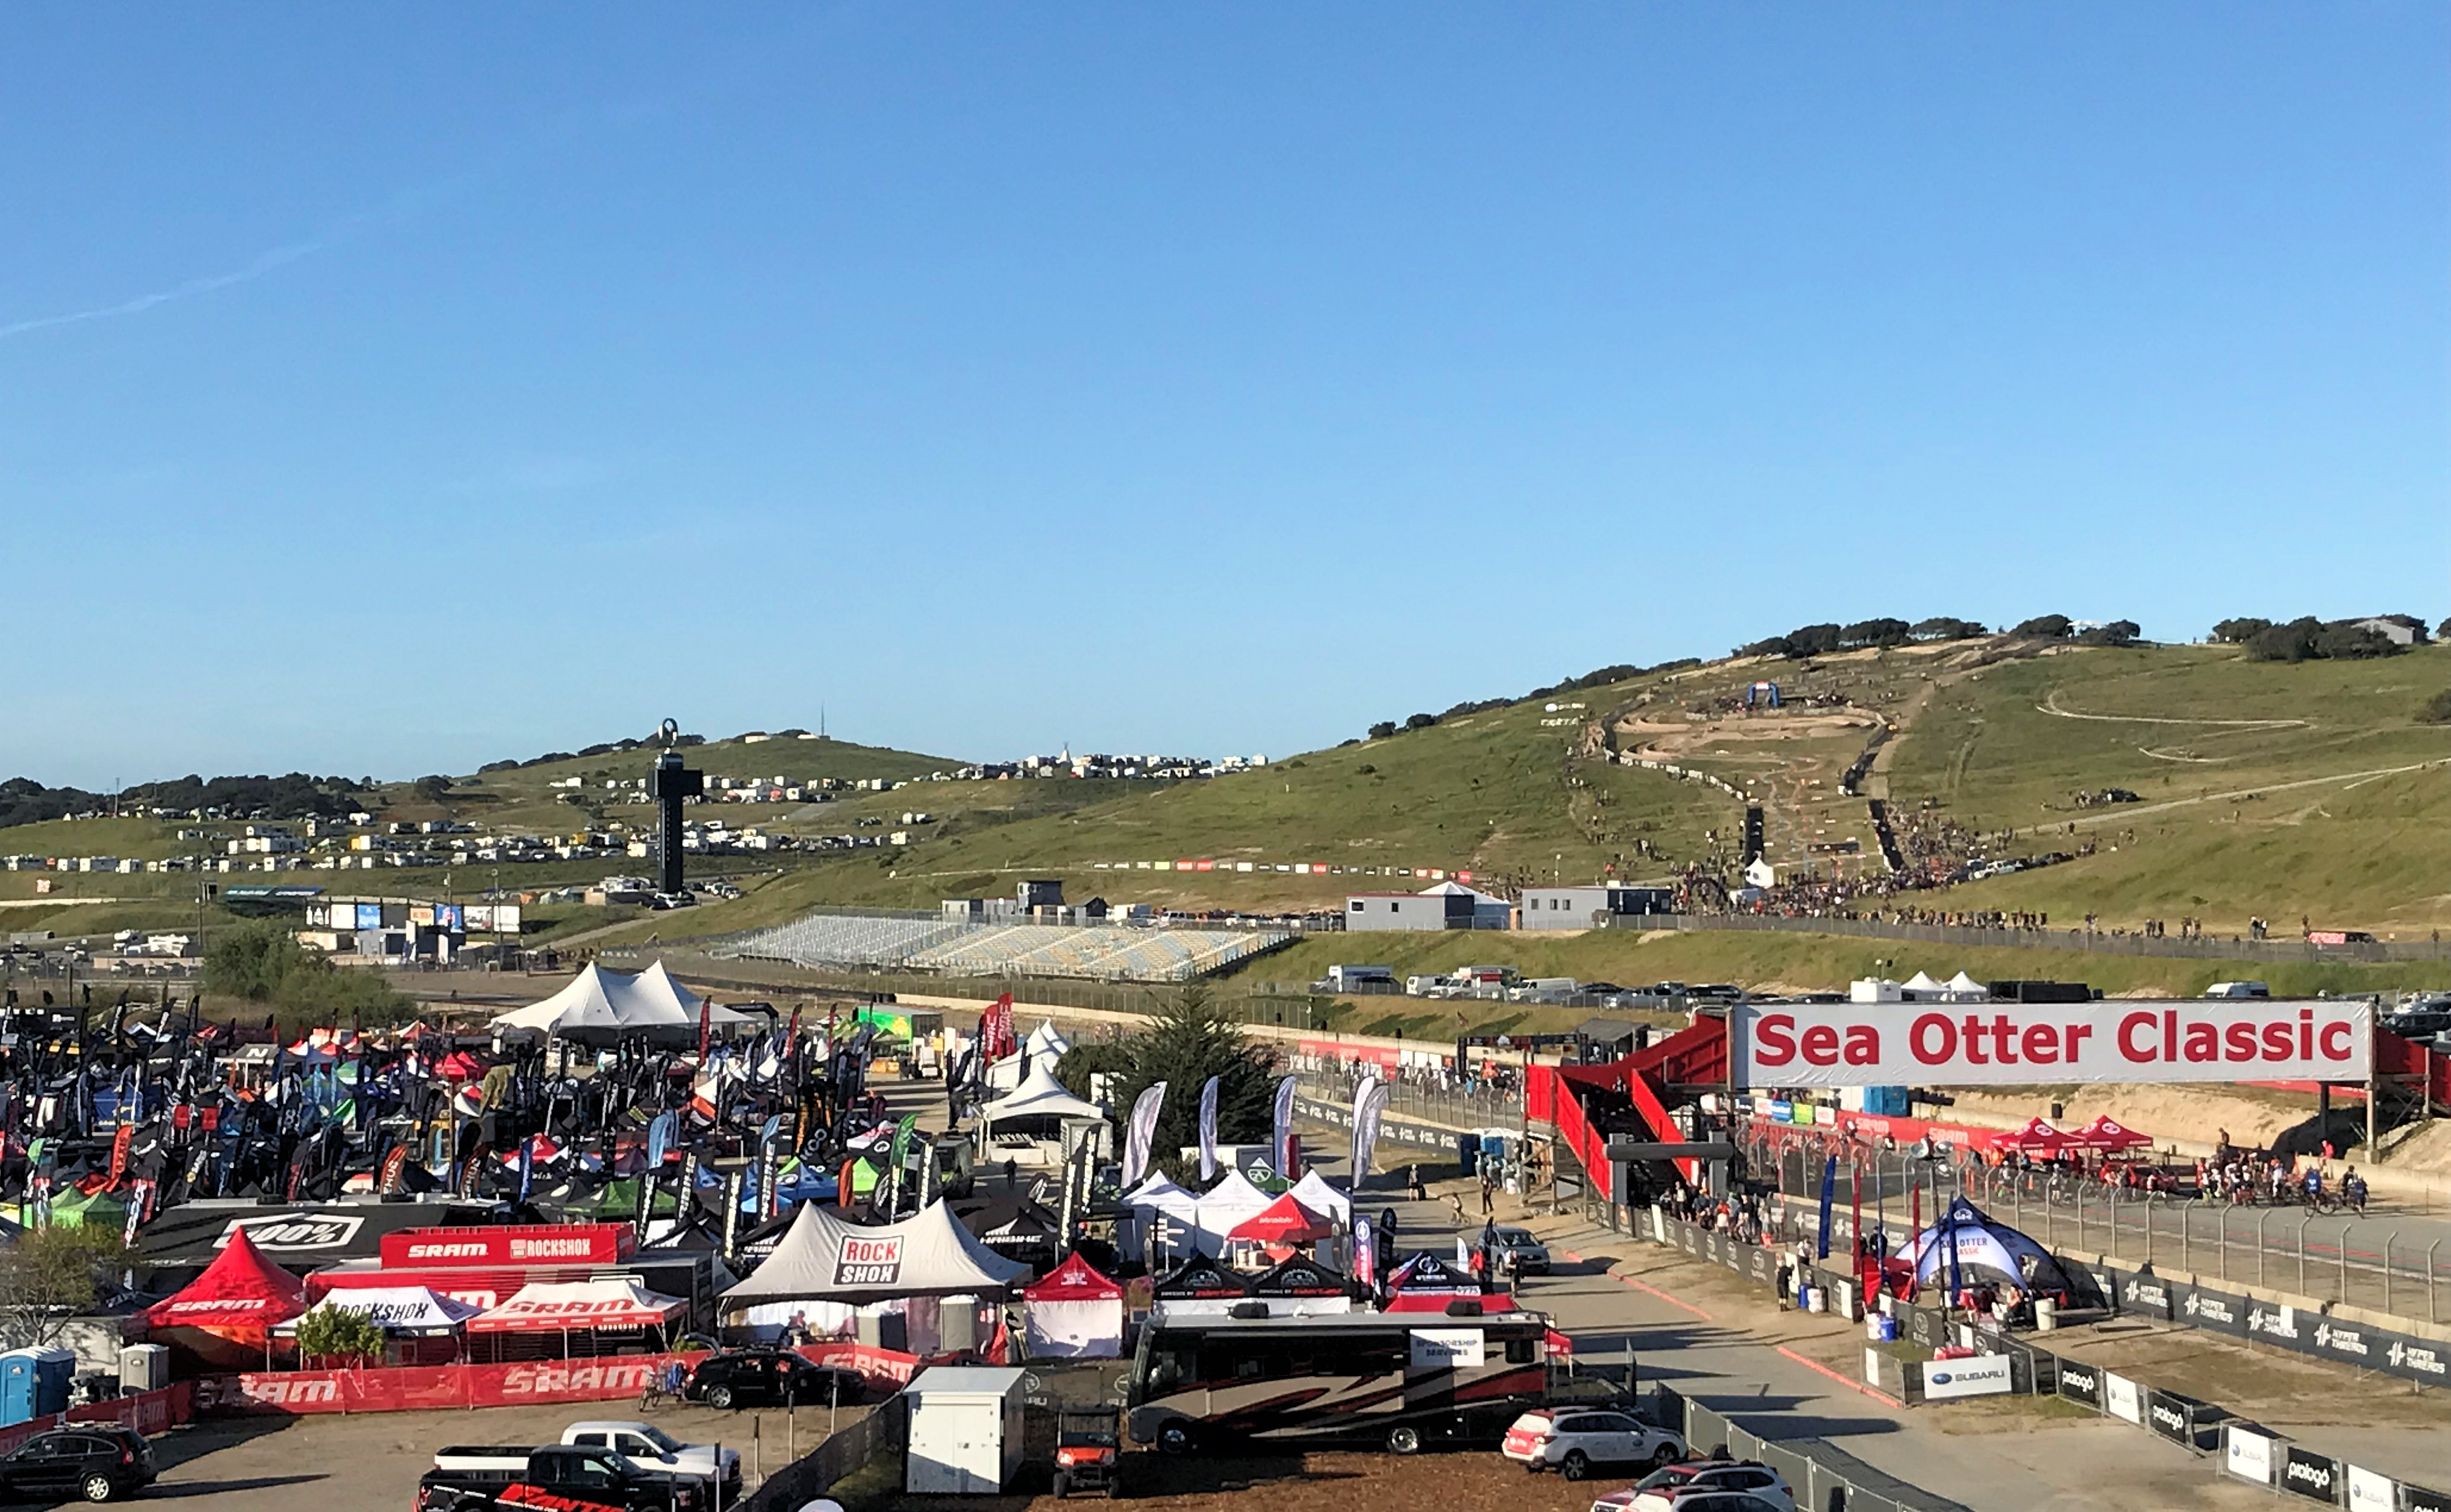 Wide view of the Sea Otter Classic event